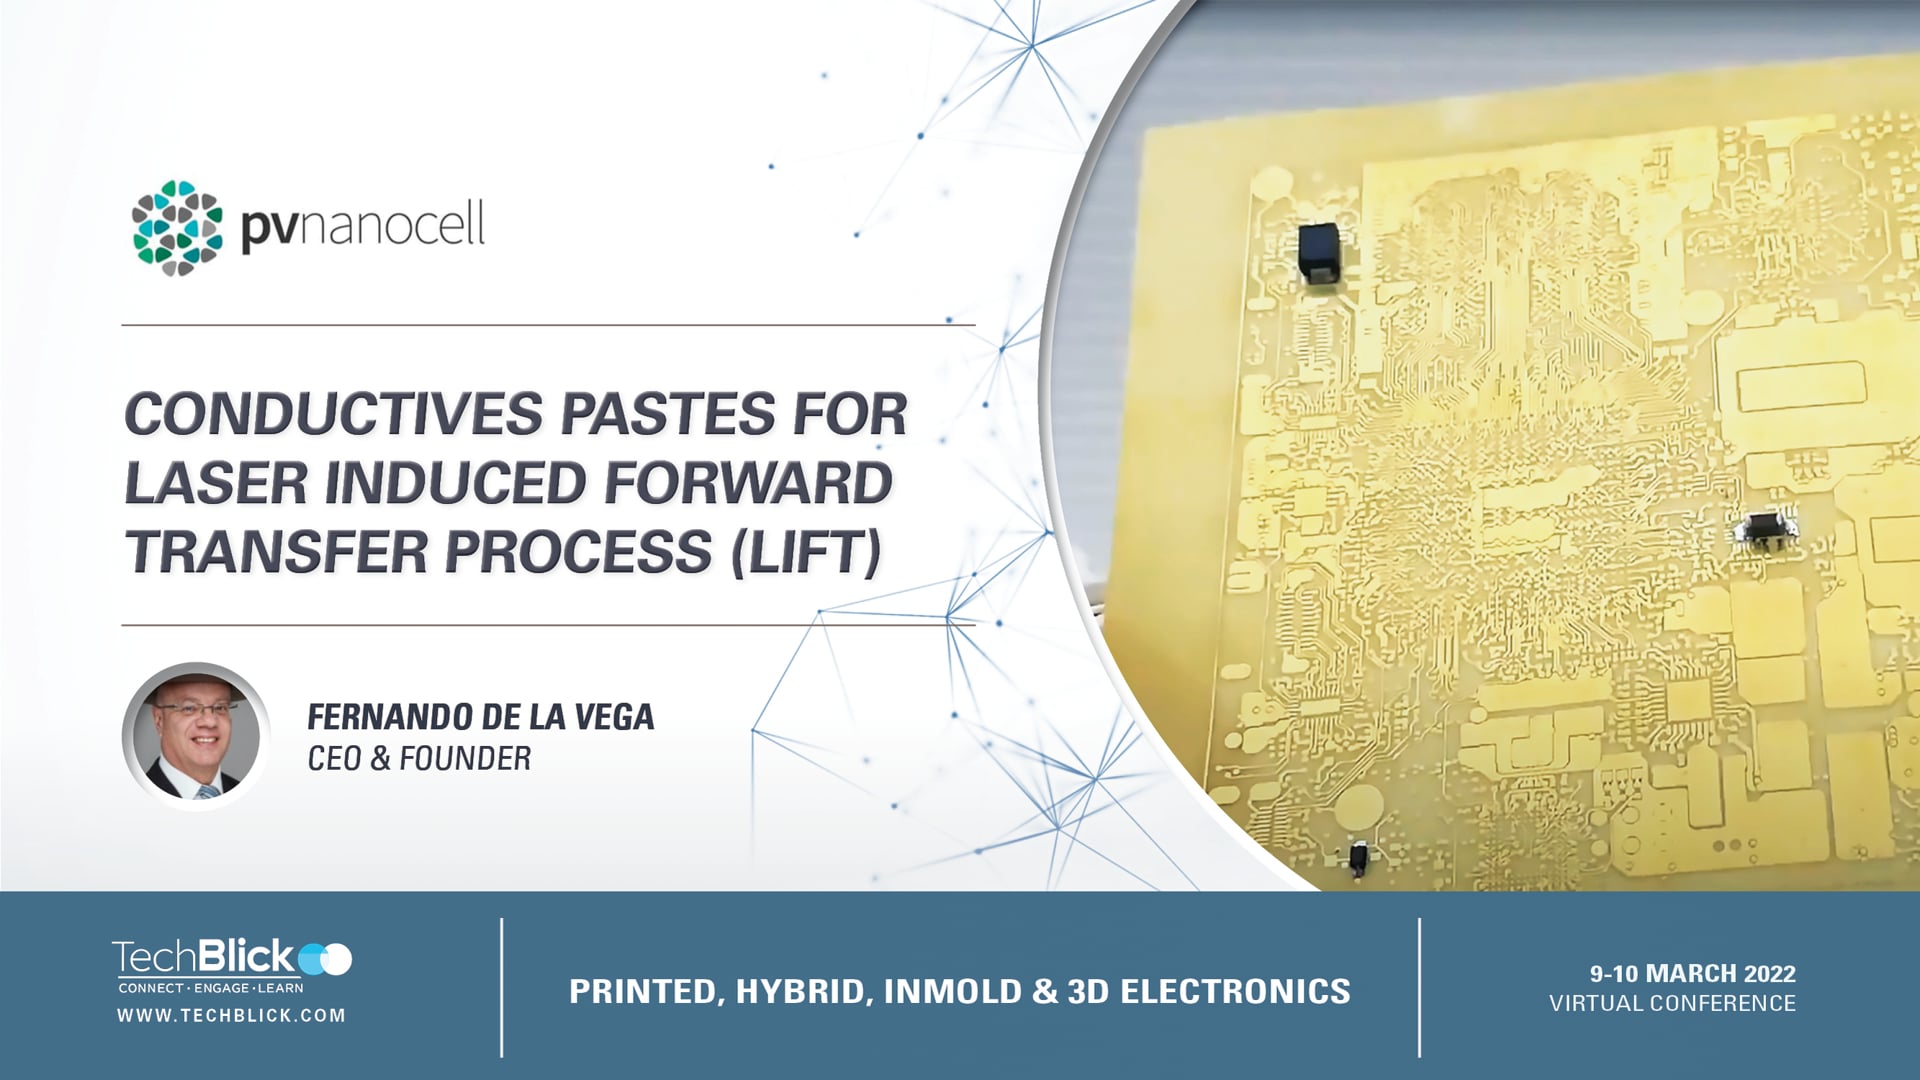 10 March 2022 | PV Nanocell | Conductive Pastes For Laser-Induced Forward Transfer Process (Lift) | 5 min